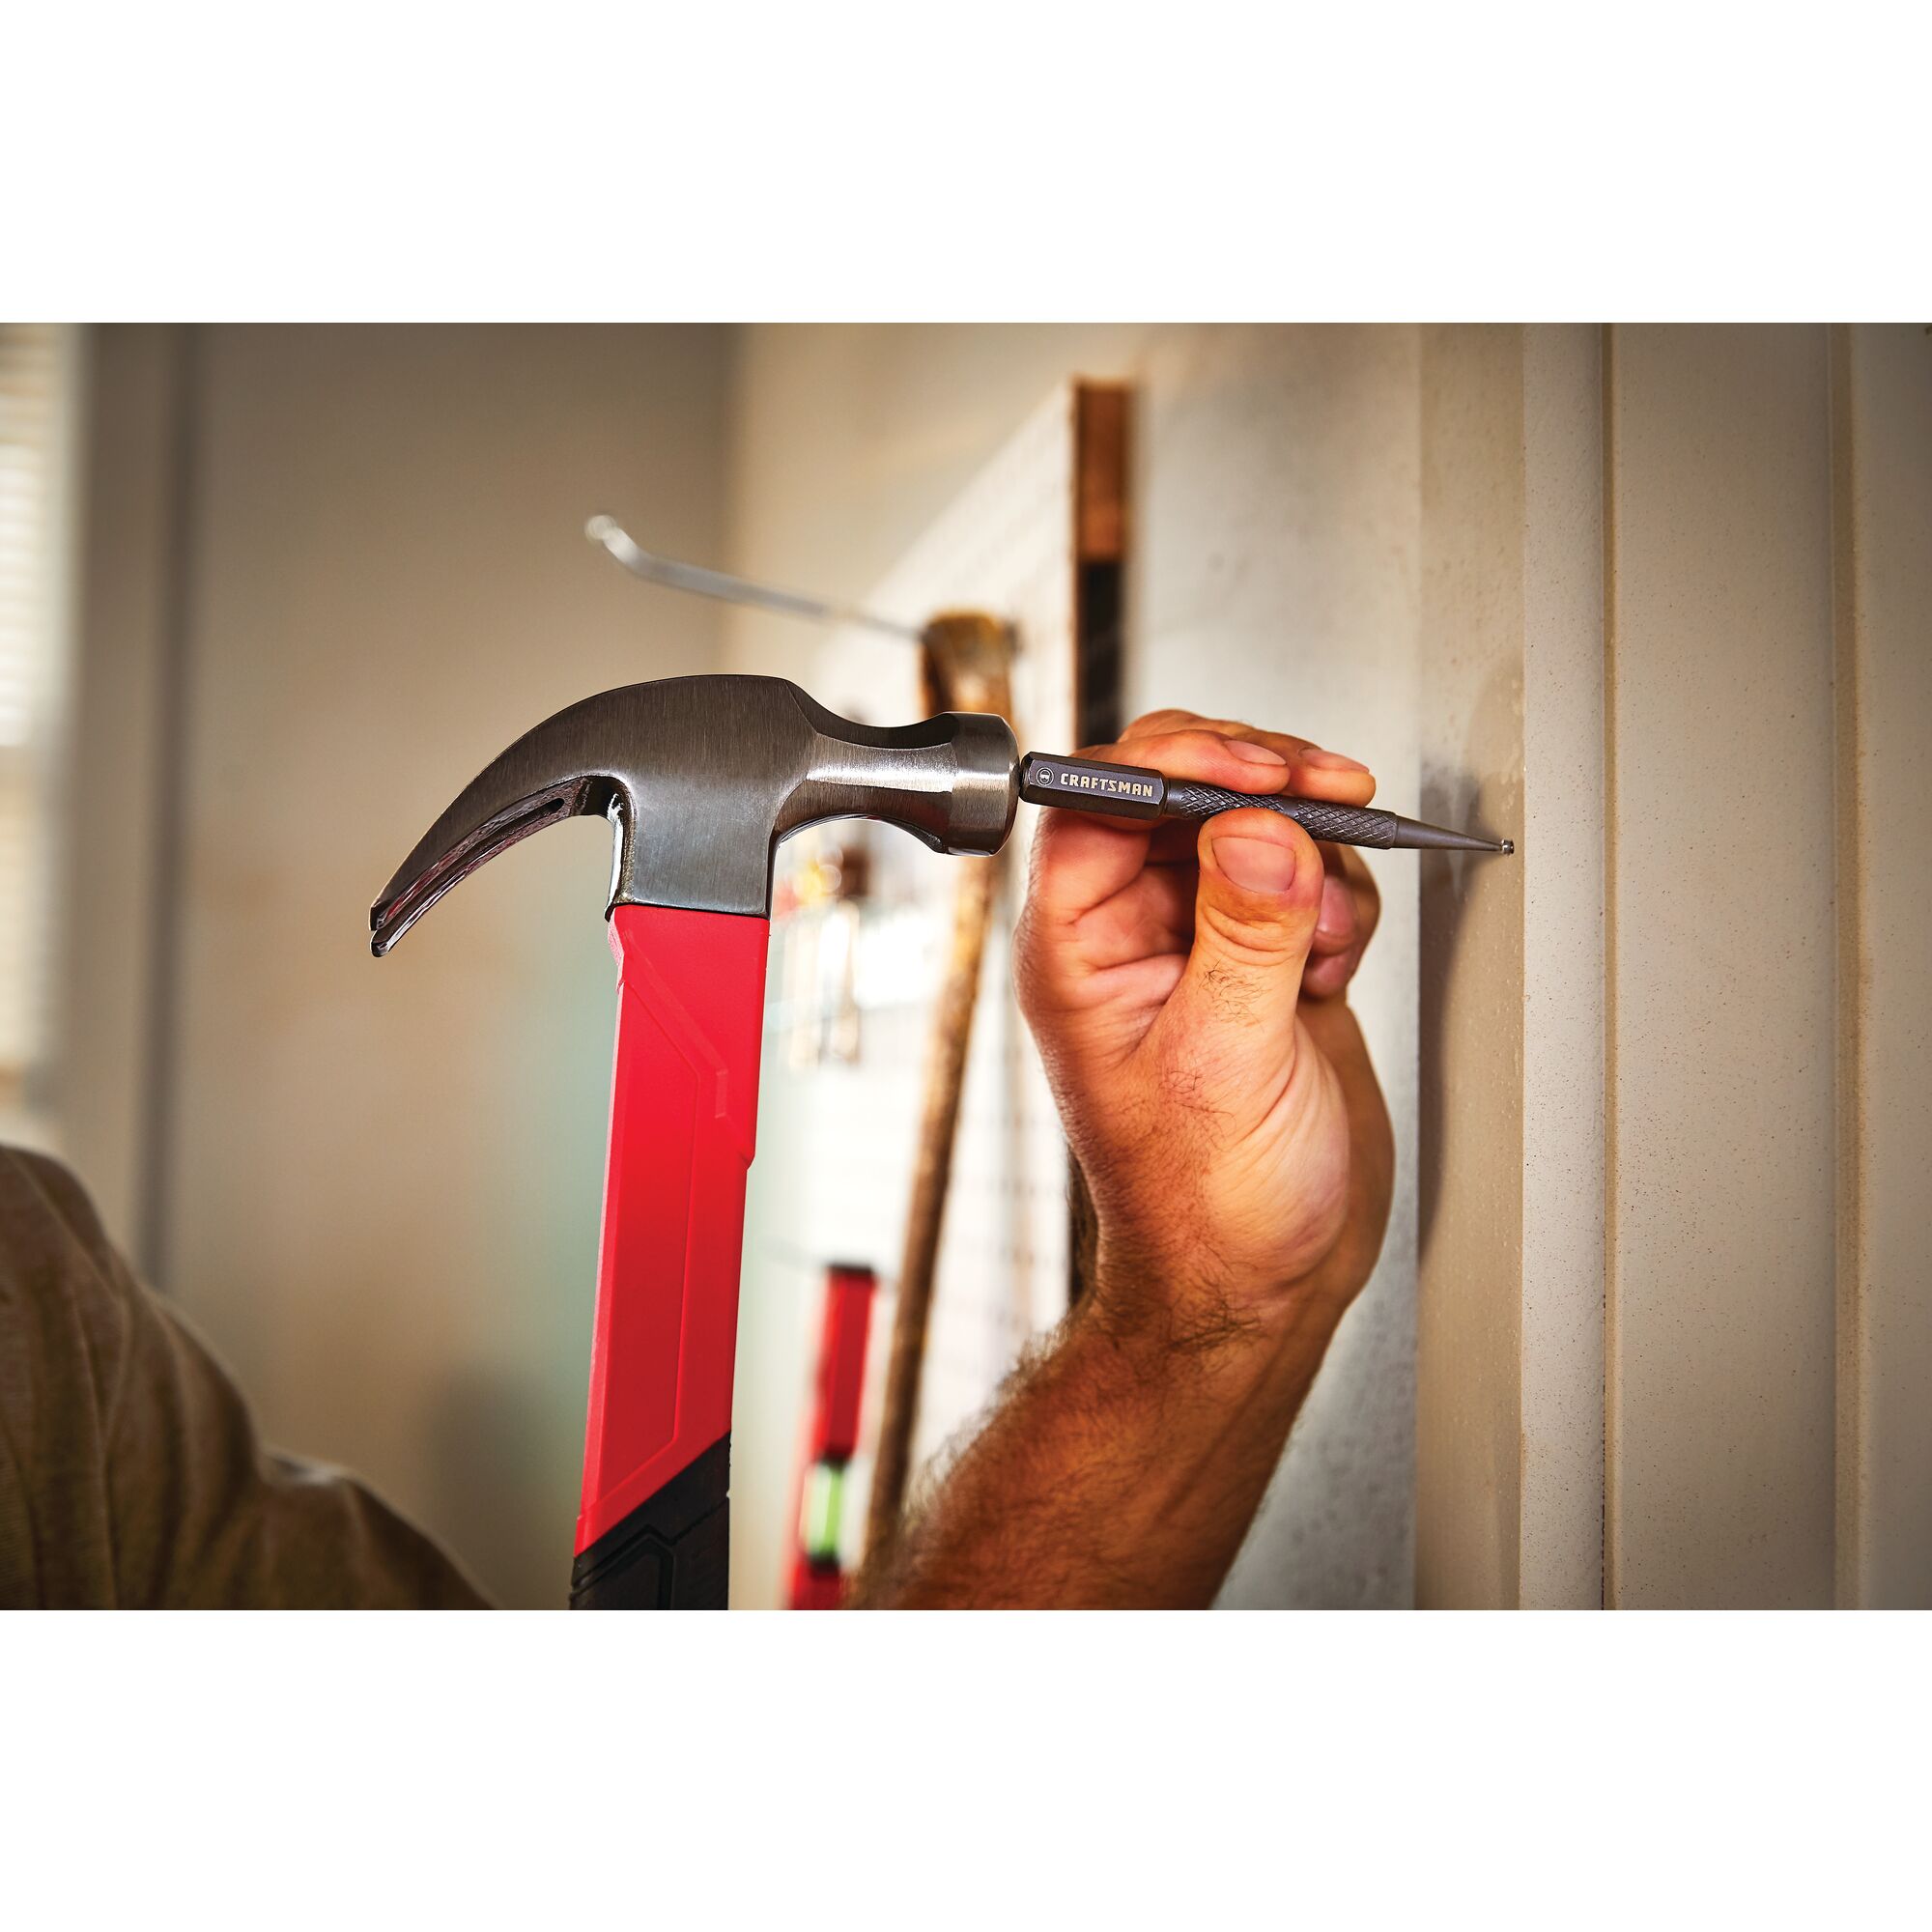 View of CRAFTSMAN Handtools: Construction  being used by consumer